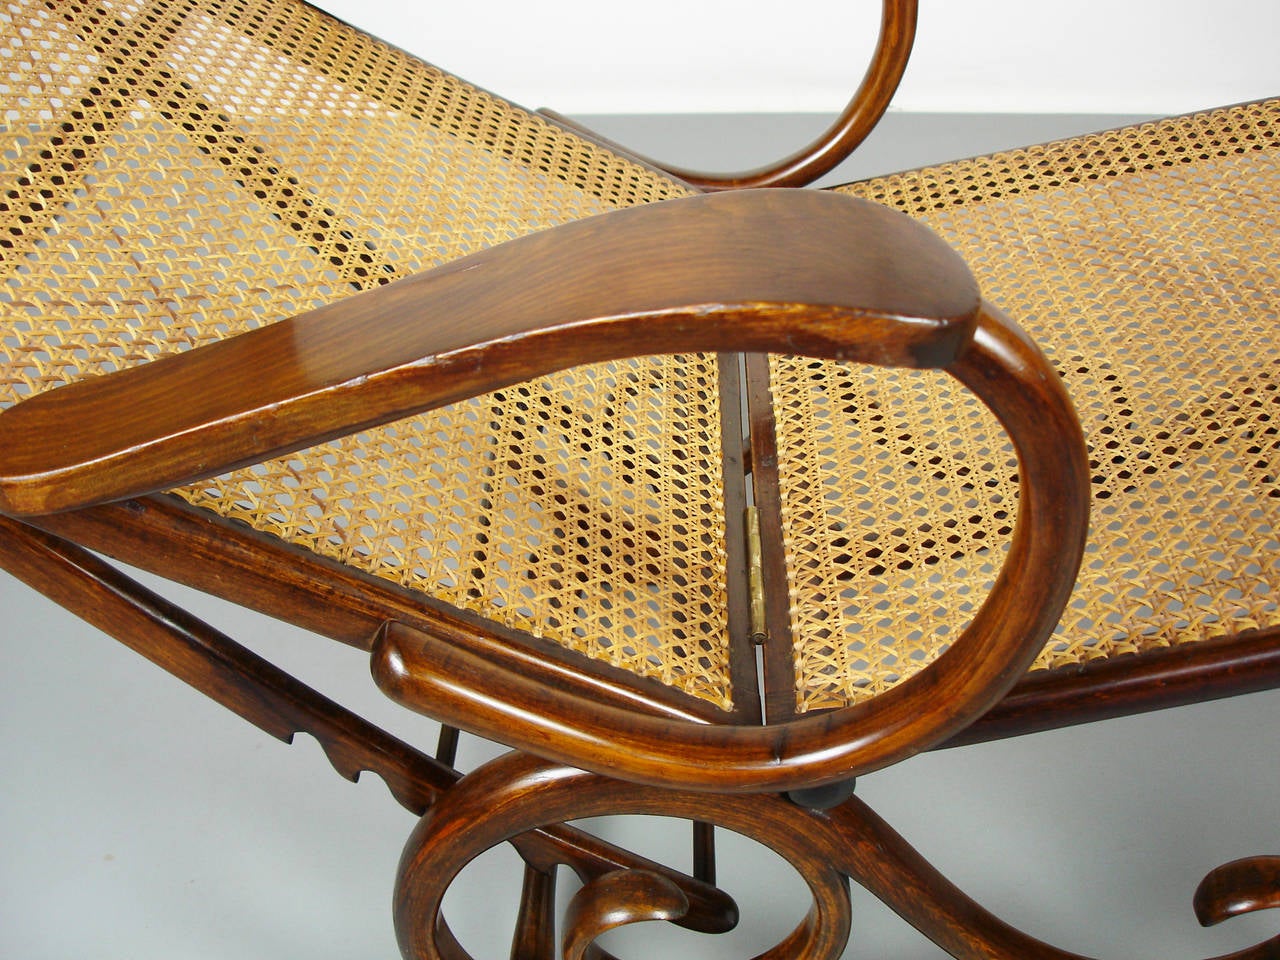 Beech Bent Wood Chaise Longue Attributed to Thonet